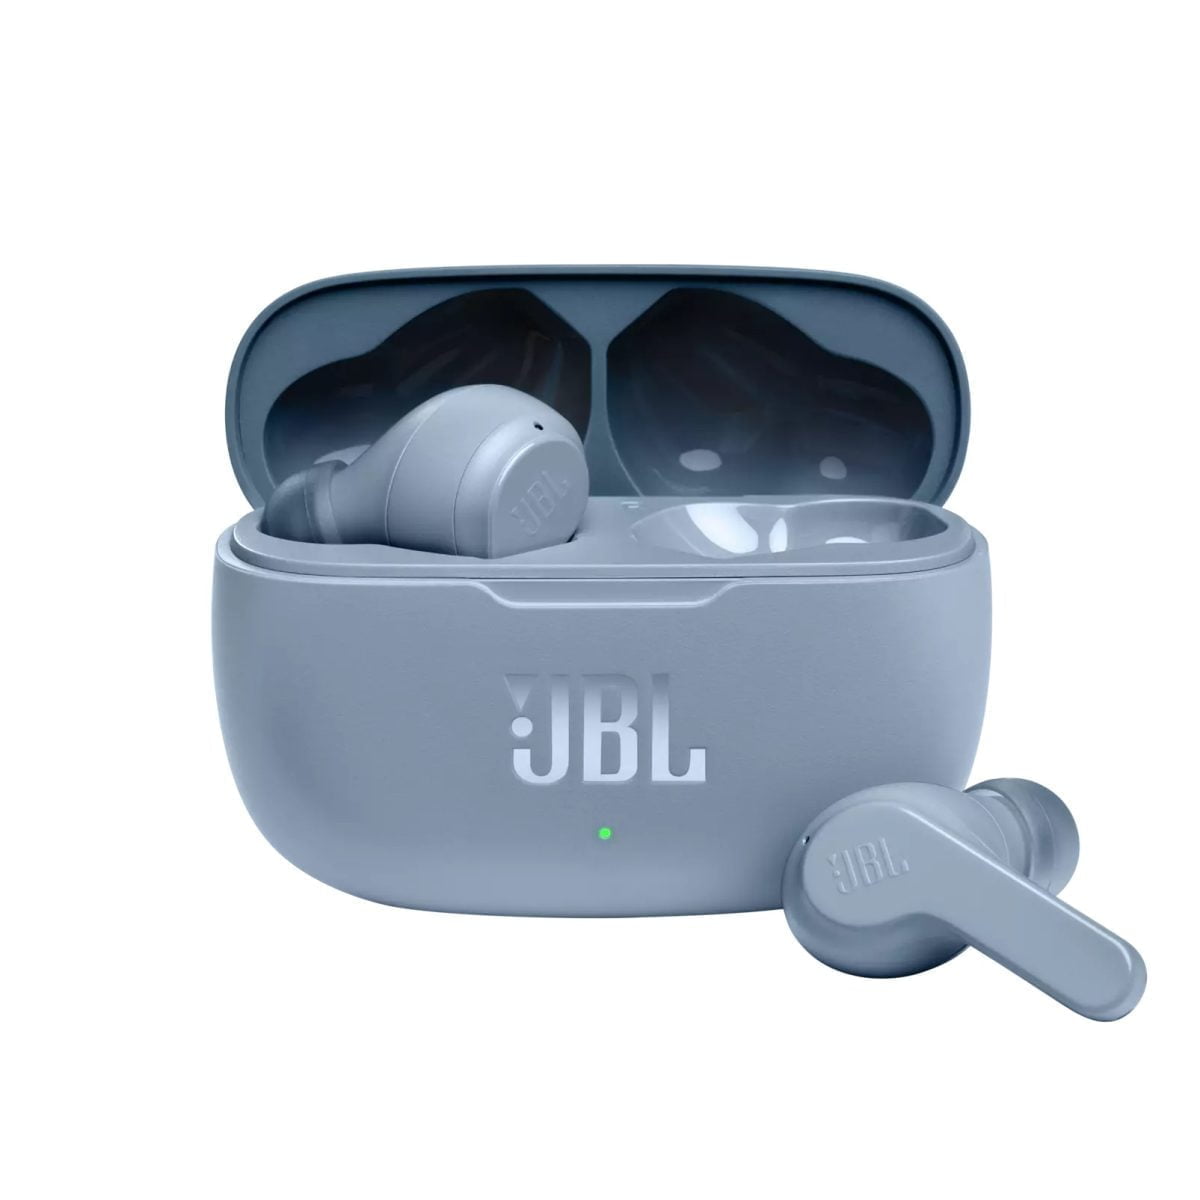 1.Jbl Vibe Wave 200Tws Product Image Hero Blue Jbl &Amp;Lt;H1&Amp;Gt;Jbl Wave 200Tws True Wireless Earbuds-Blue&Amp;Lt;/H1&Amp;Gt;&Amp;Lt;Div Class=&Amp;Quot;Wpview Wpview-Wrap&Amp;Quot; Data-Wpview-Text=&Amp;Quot;Https%3A%2F%2Fwww.youtube.com%2Fwatch%3Fv%3Dkcer3Oqq1Hm&Amp;Quot; Data-Wpview-Type=&Amp;Quot;Embedurl&Amp;Quot;&Amp;Gt;&Amp;Lt;Span Class=&Amp;Quot;Mce-Shim&Amp;Quot;&Amp;Gt;&Amp;Lt;/Span&Amp;Gt;&Amp;Lt;Span Class=&Amp;Quot;Wpview-End&Amp;Quot;&Amp;Gt;&Amp;Lt;/Span&Amp;Gt;&Amp;Lt;/Div&Amp;Gt;&Amp;Lt;P&Amp;Gt;Amp Up Your Routine With The Sound You Love! Get Powerful, Jbl Deep Bass Sound And All The Freedom Of True Wireless For Up To 20 Hours With The Jbl Wave 200Tws. Take Your World With You. Just A Touch Of The Earbud Manages Your Calls And Music And Puts You In Touch With Your Voice Assistant. And With Dual Connect You Can Use Either Earbud And Save Battery Life. Ultra-Light And Comfortable, Thanks To Their Ergonomic Shape, The Jbl Wave 200Tws Are Fun, Ready-To-Use.&Amp;Lt;/P&Amp;Gt; Jbl Wave Jbl Wave 200Tws True Wireless Earbuds-Blue